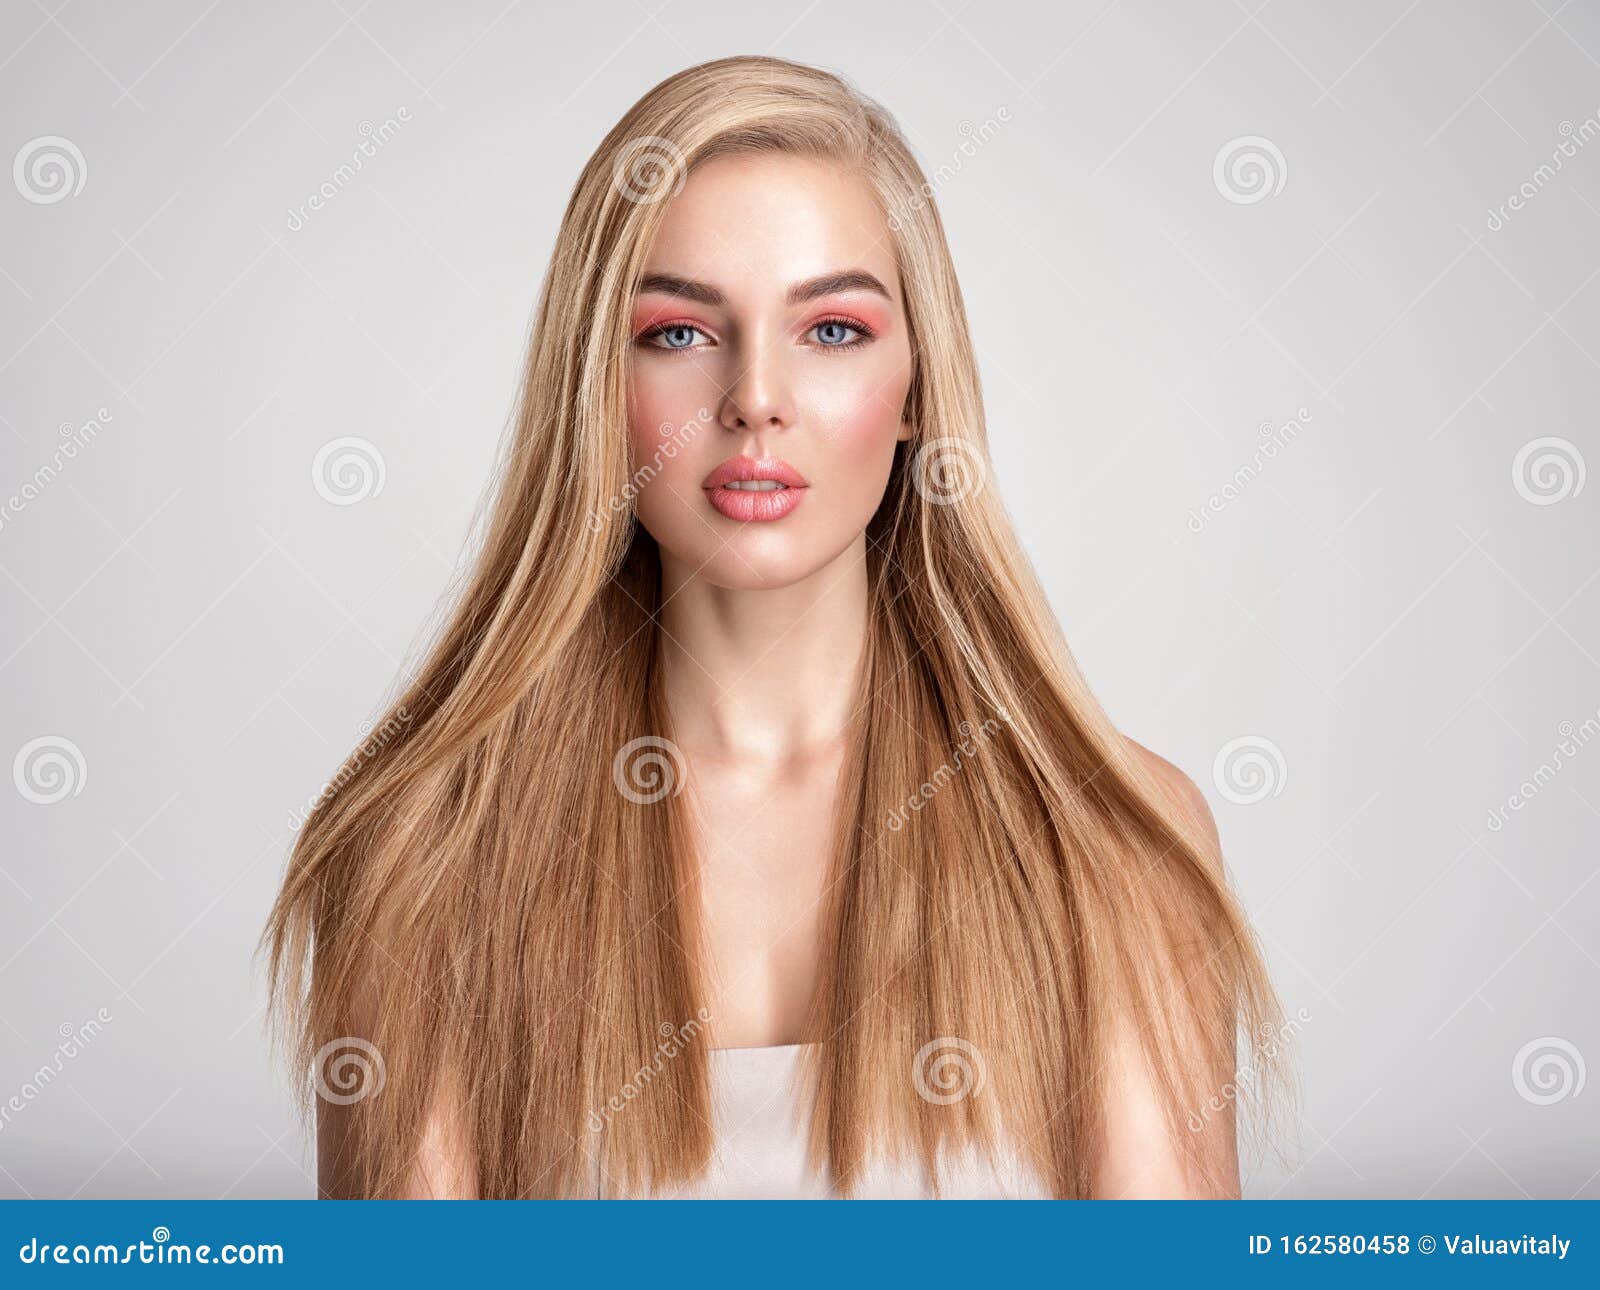 Blonde woman with straight hair and a ponytail - wide 3